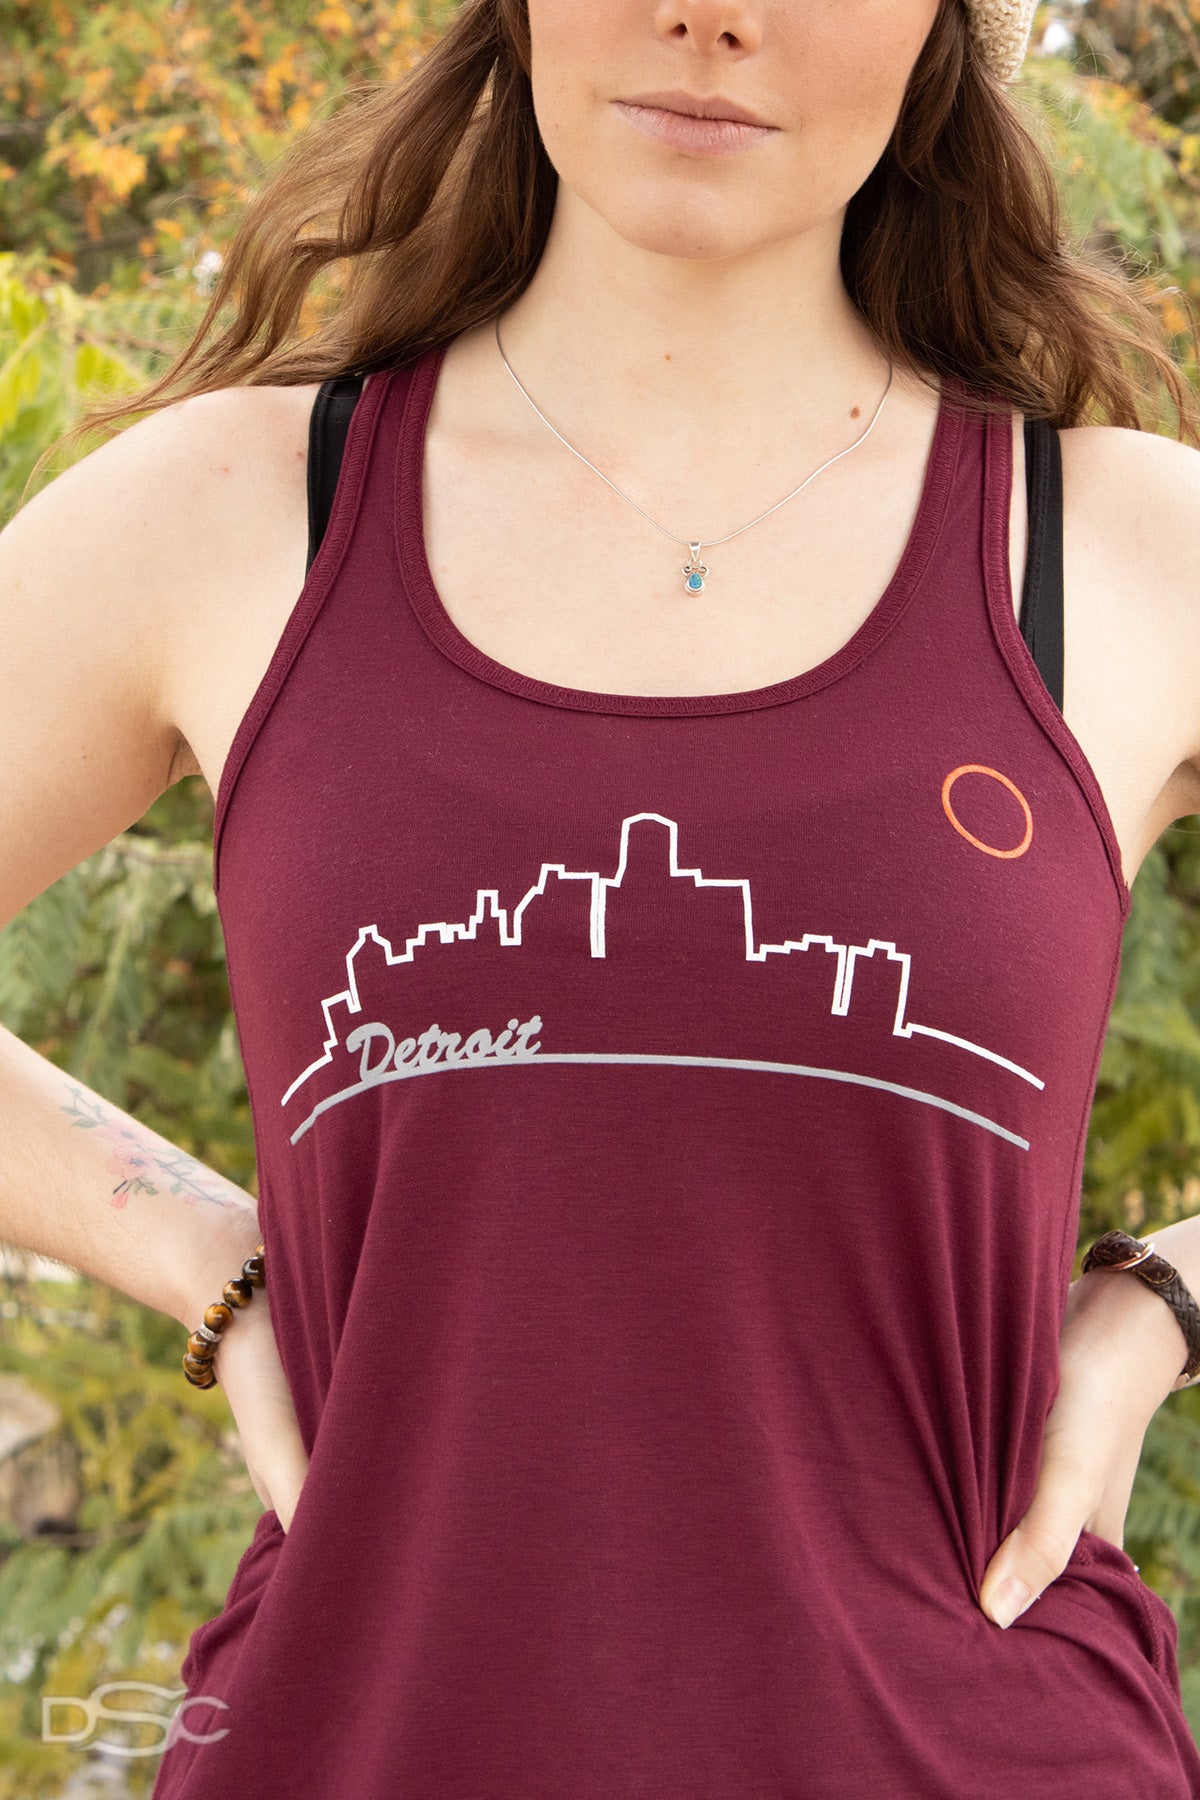 Ladies Relaxed Racerback Tank Top - Detroit Skyline Cranberry